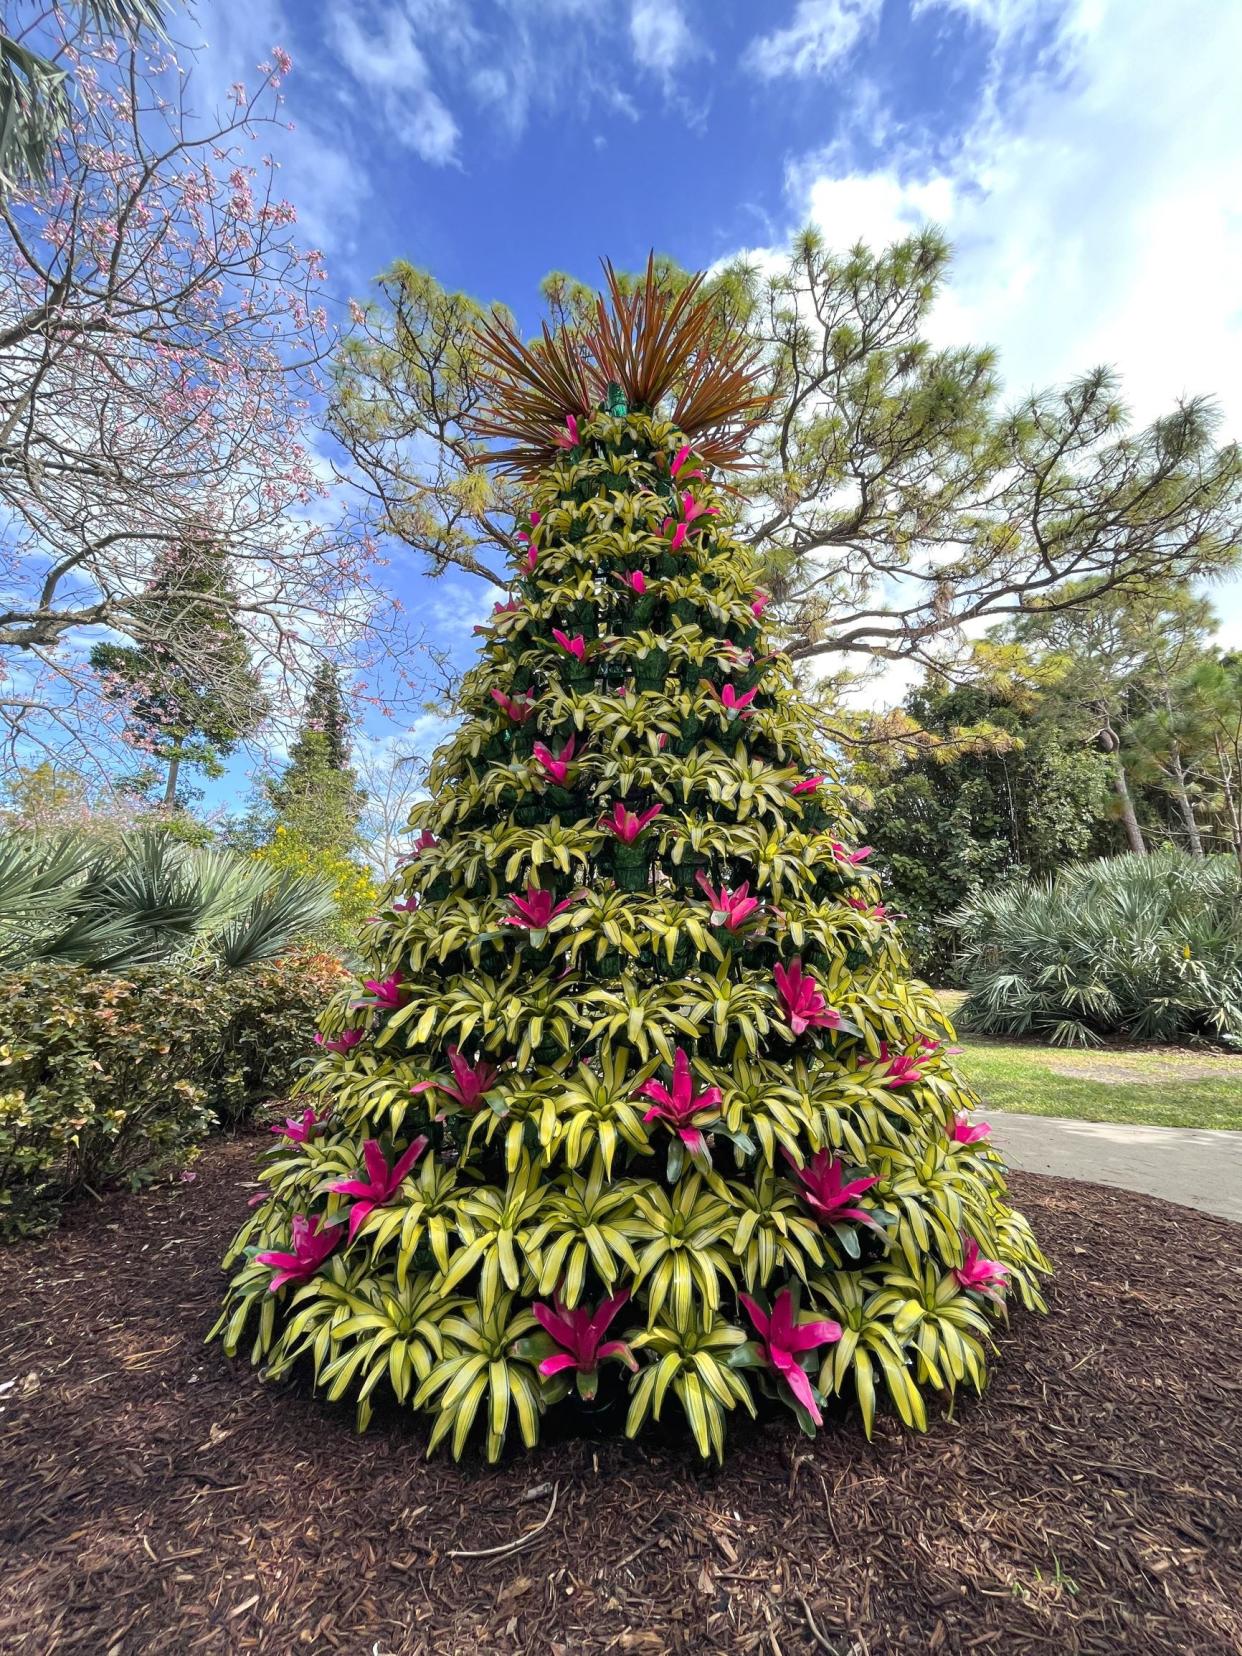 Tropical Holiday Trees are back again this year at Mounts Botanical Garden and will be on display through Dec. 31.